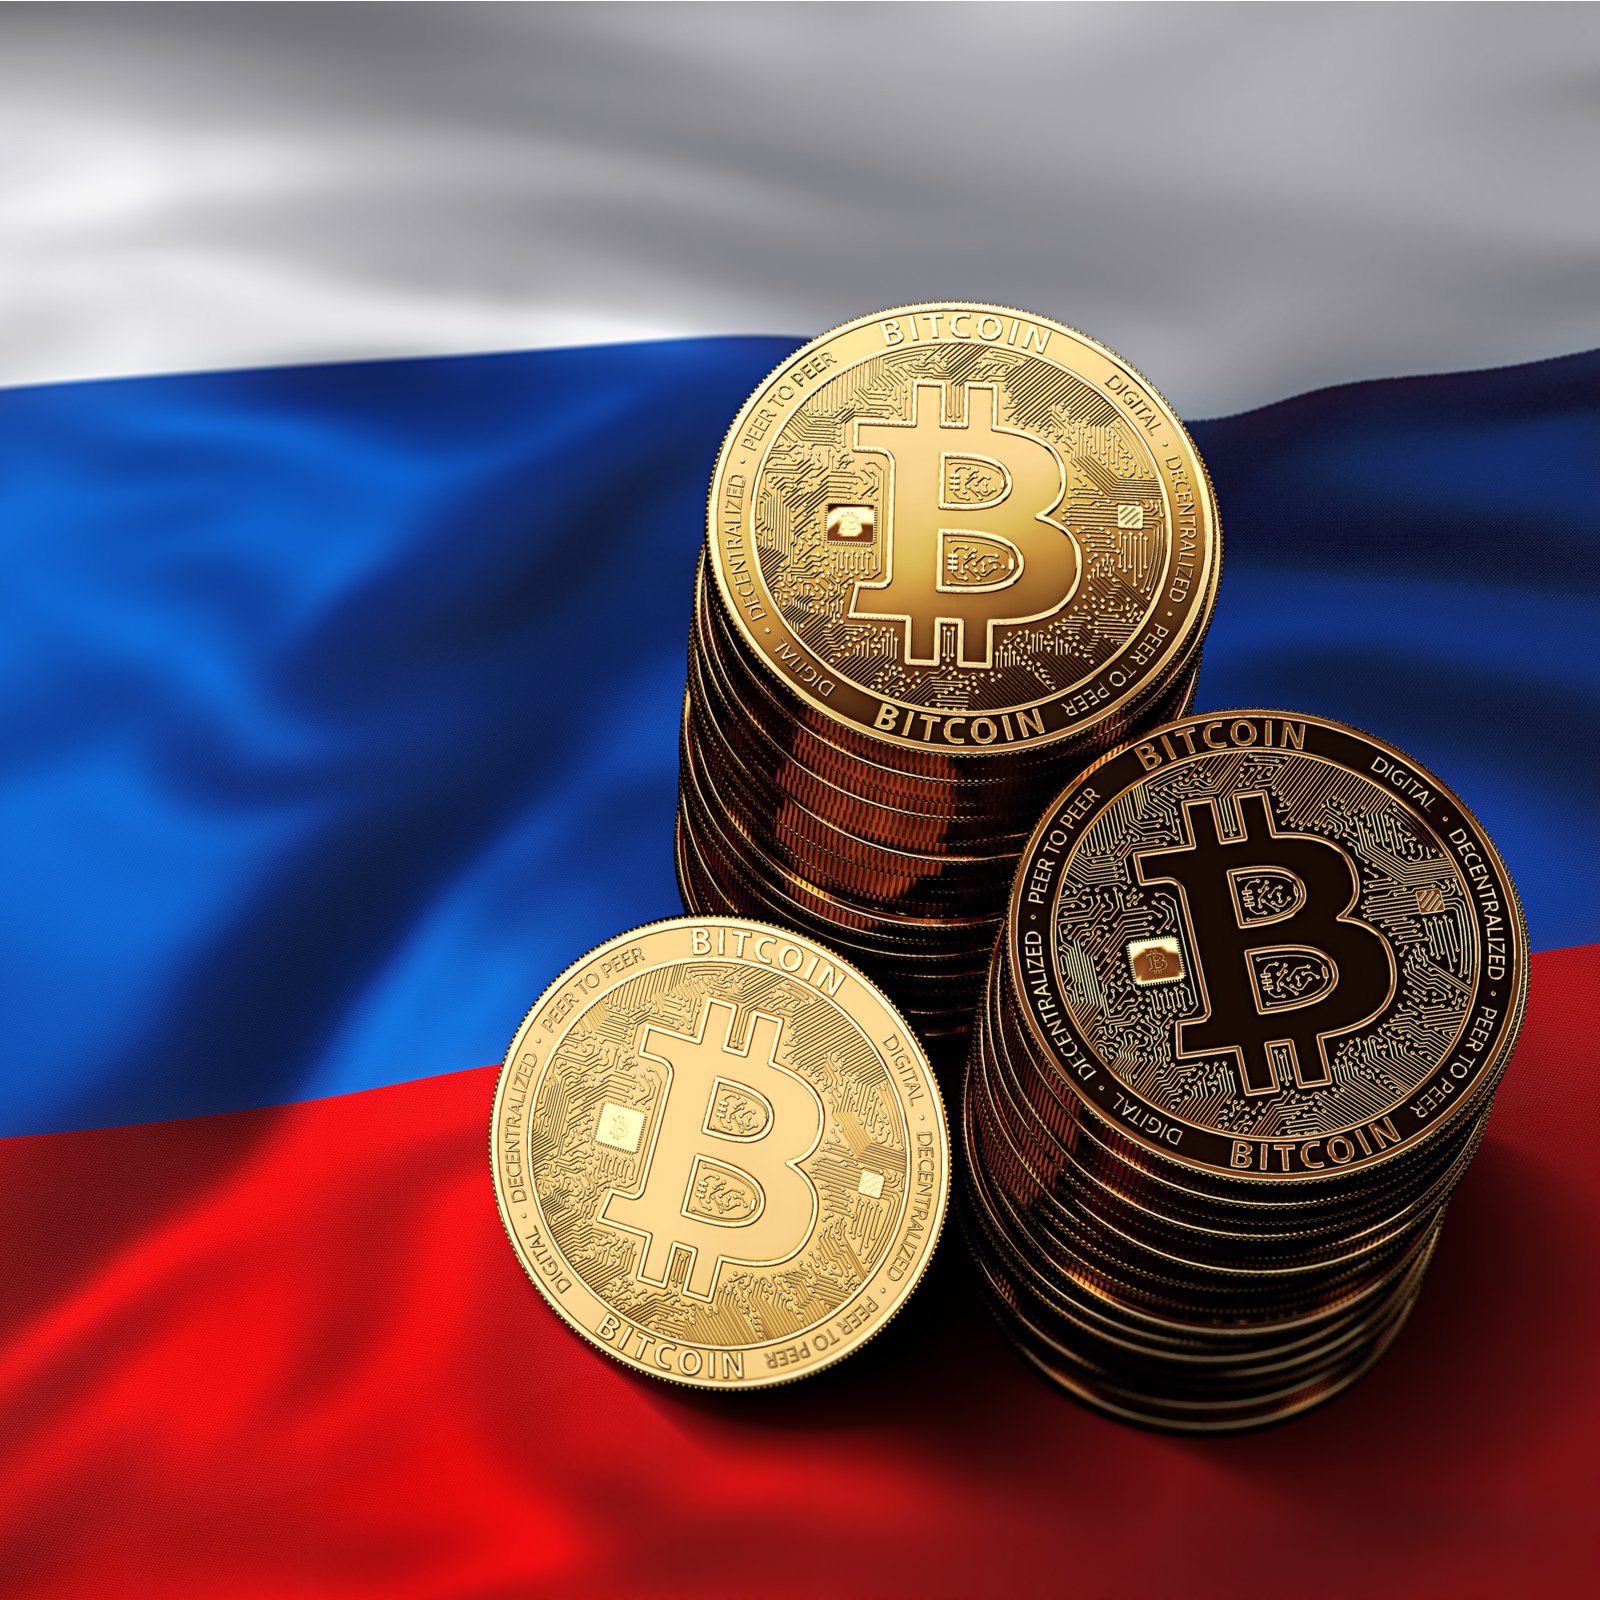 Russia’s VTB Bank's CEO "Very, Very Dangerous to Invest in Cryptocurrencies"